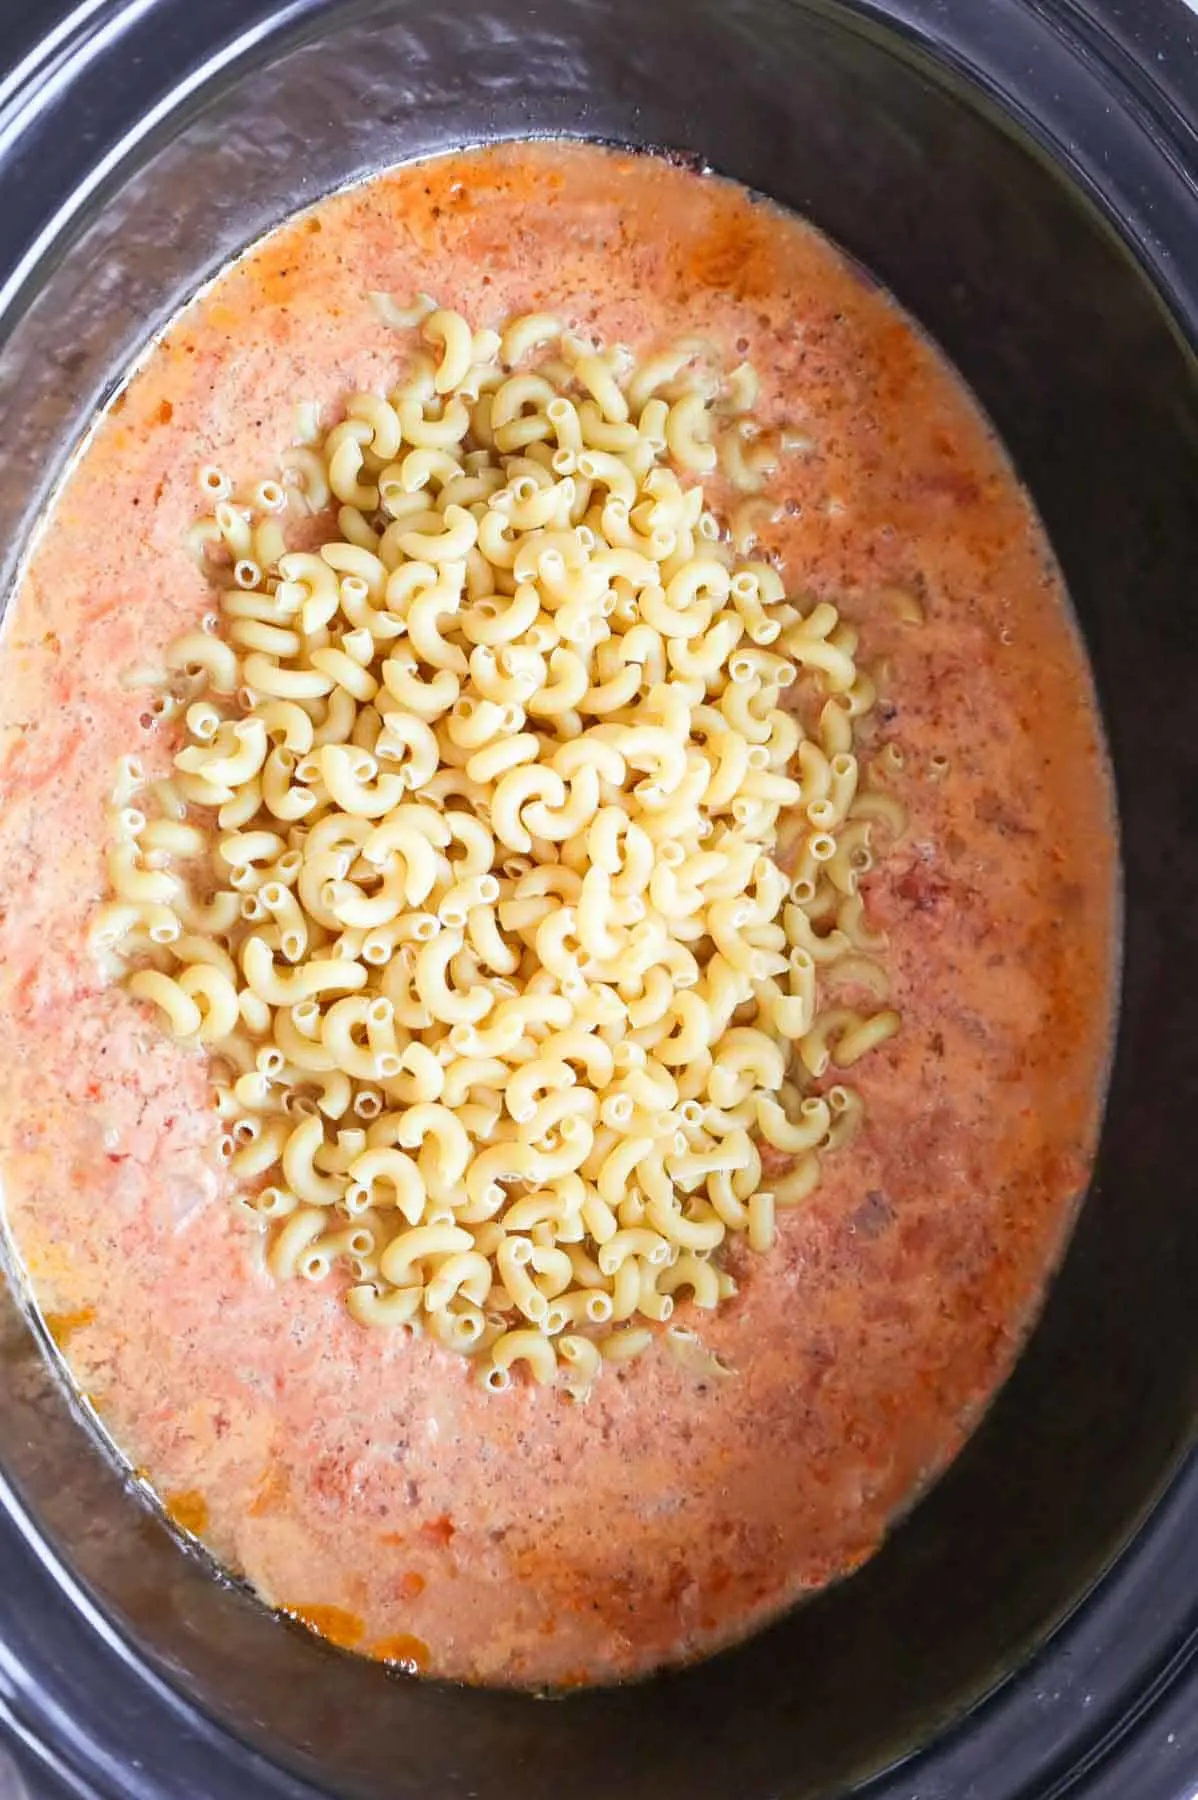 uncooked macaroni noodles added to crock pot with ground beef and sauce mixture